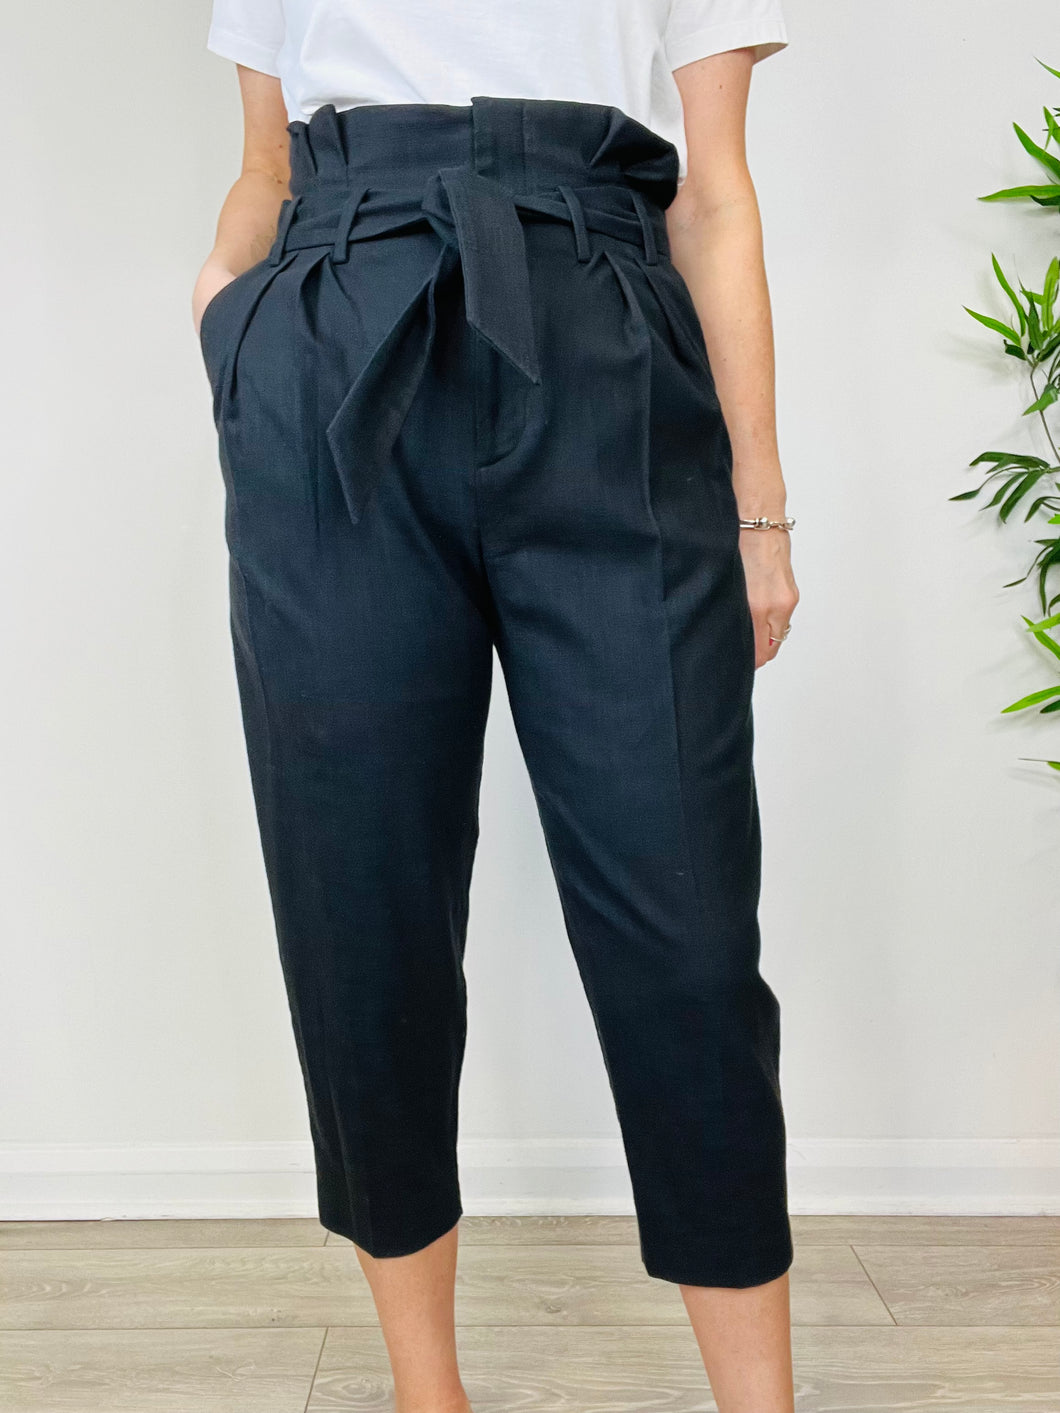 Belted Trousers - Size 36